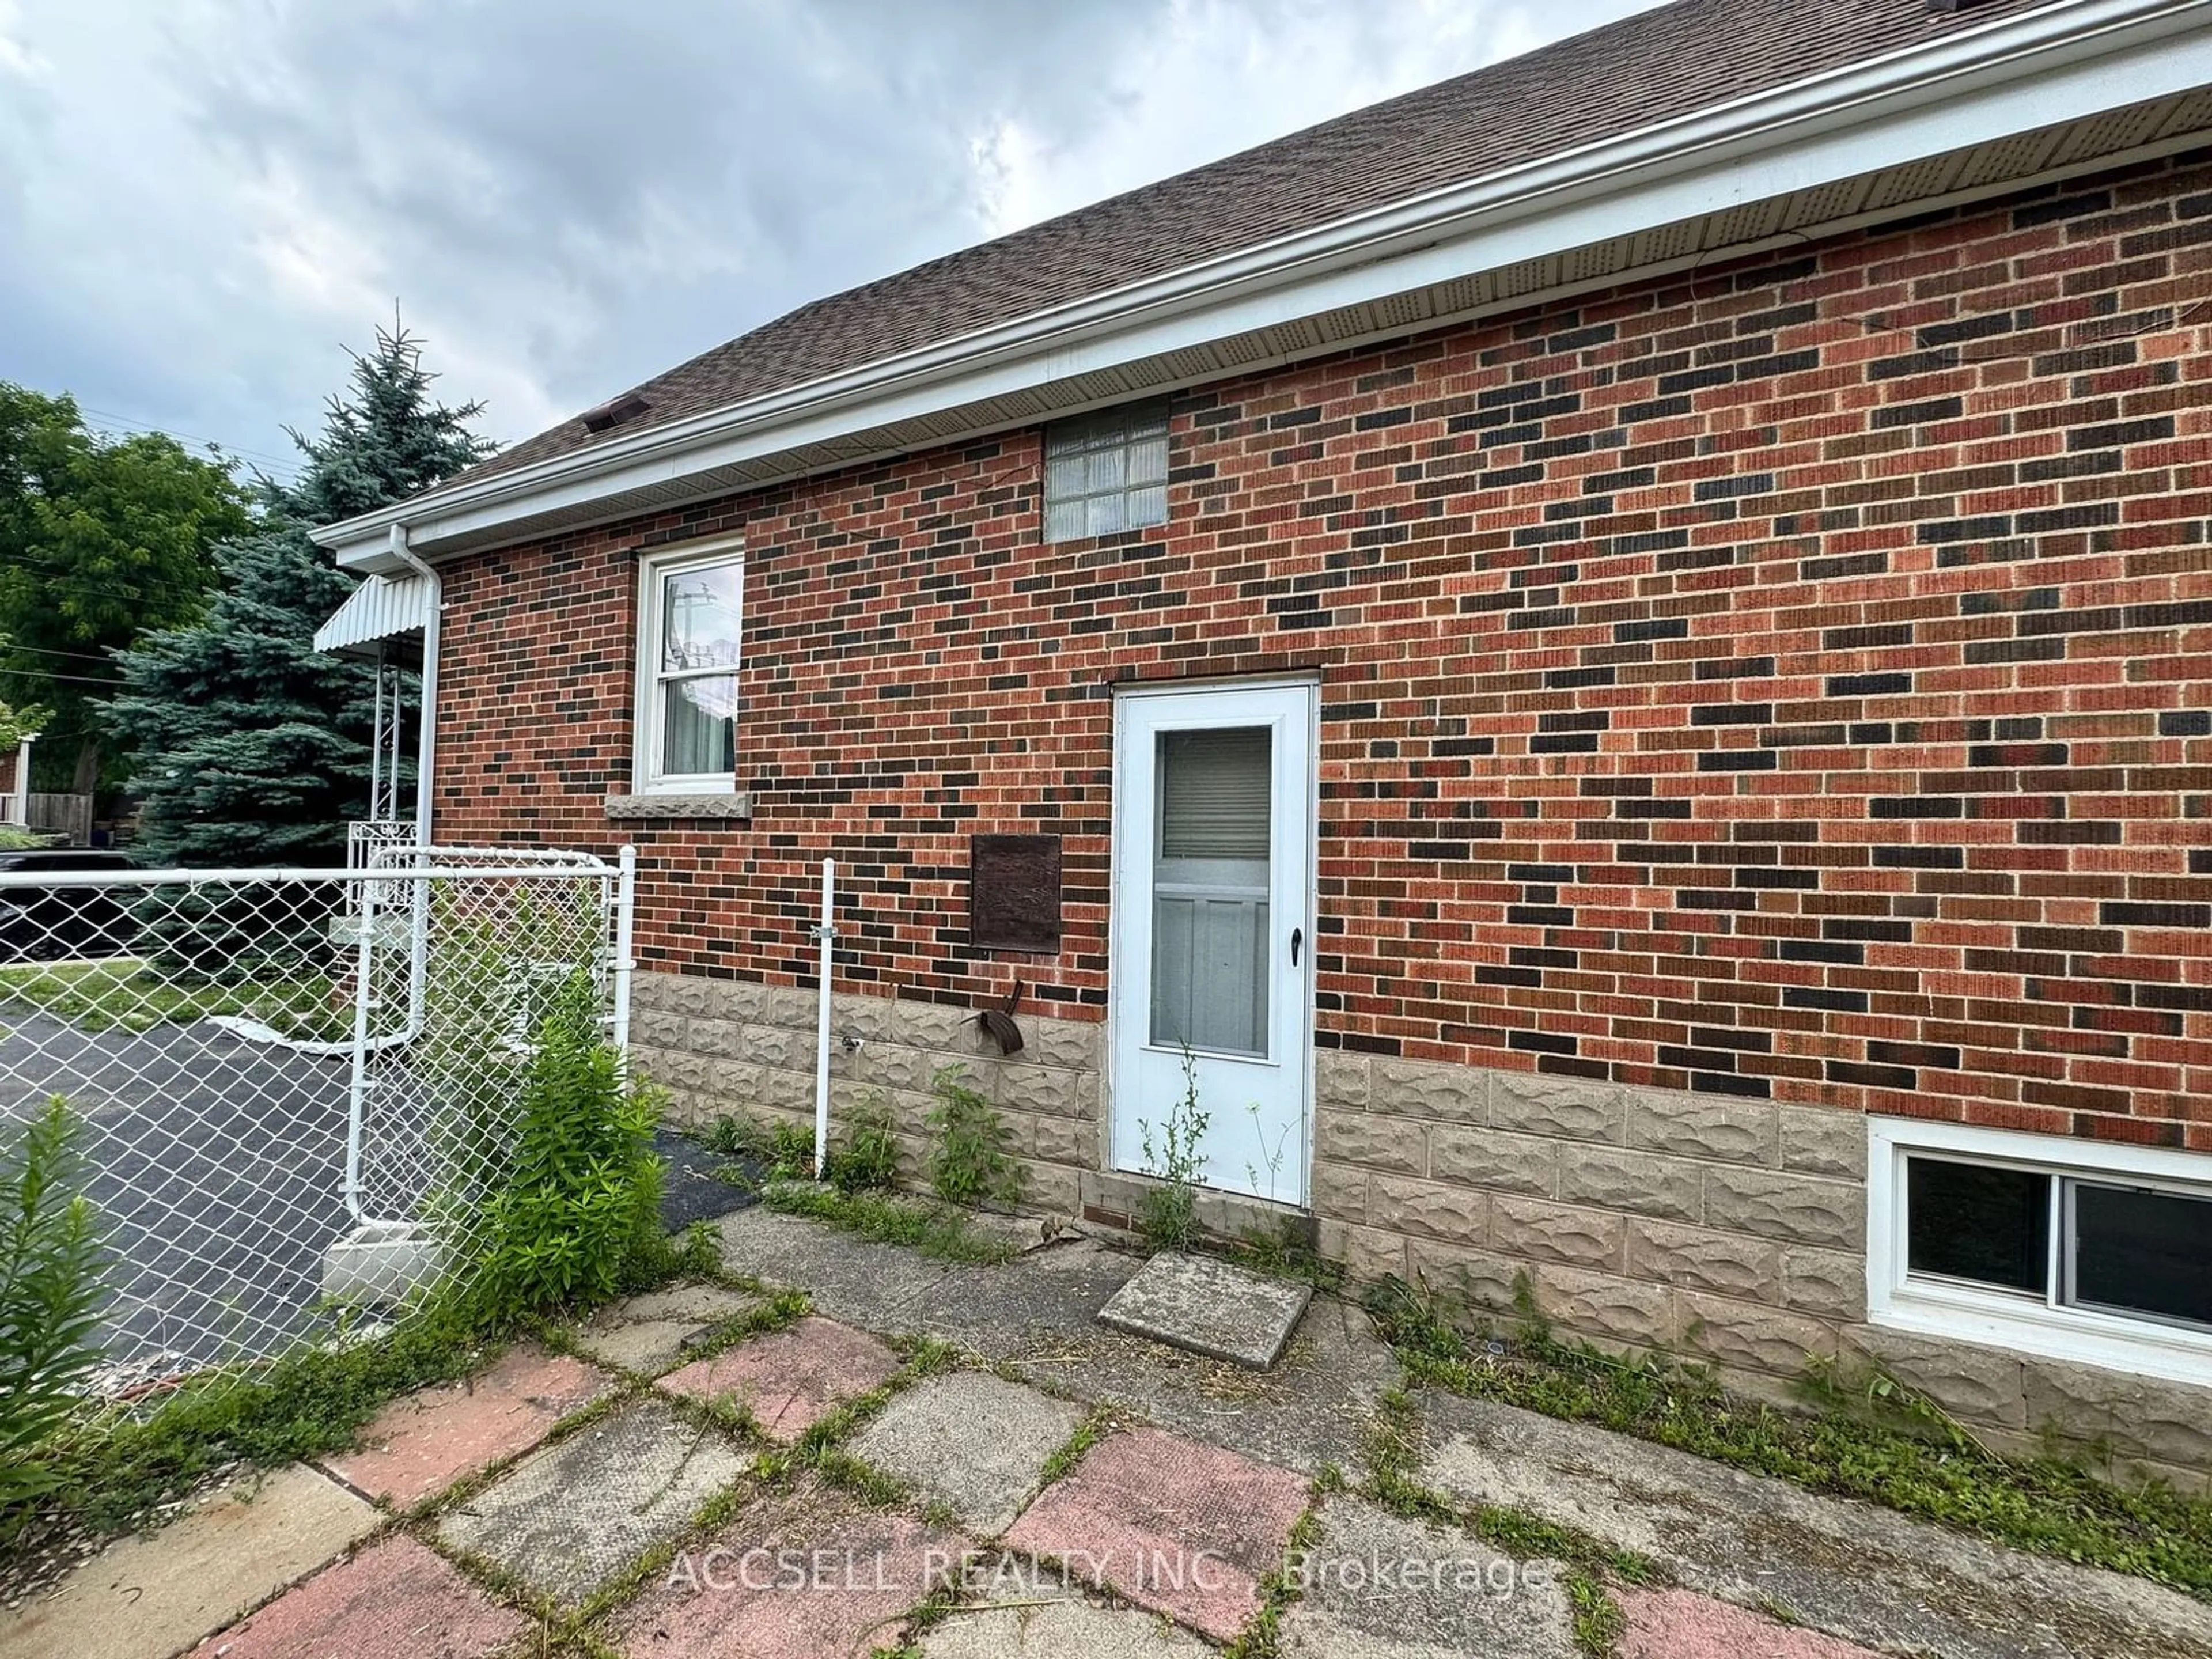 Home with brick exterior material for 167 Rosedale Ave, Hamilton Ontario L8K 4N4